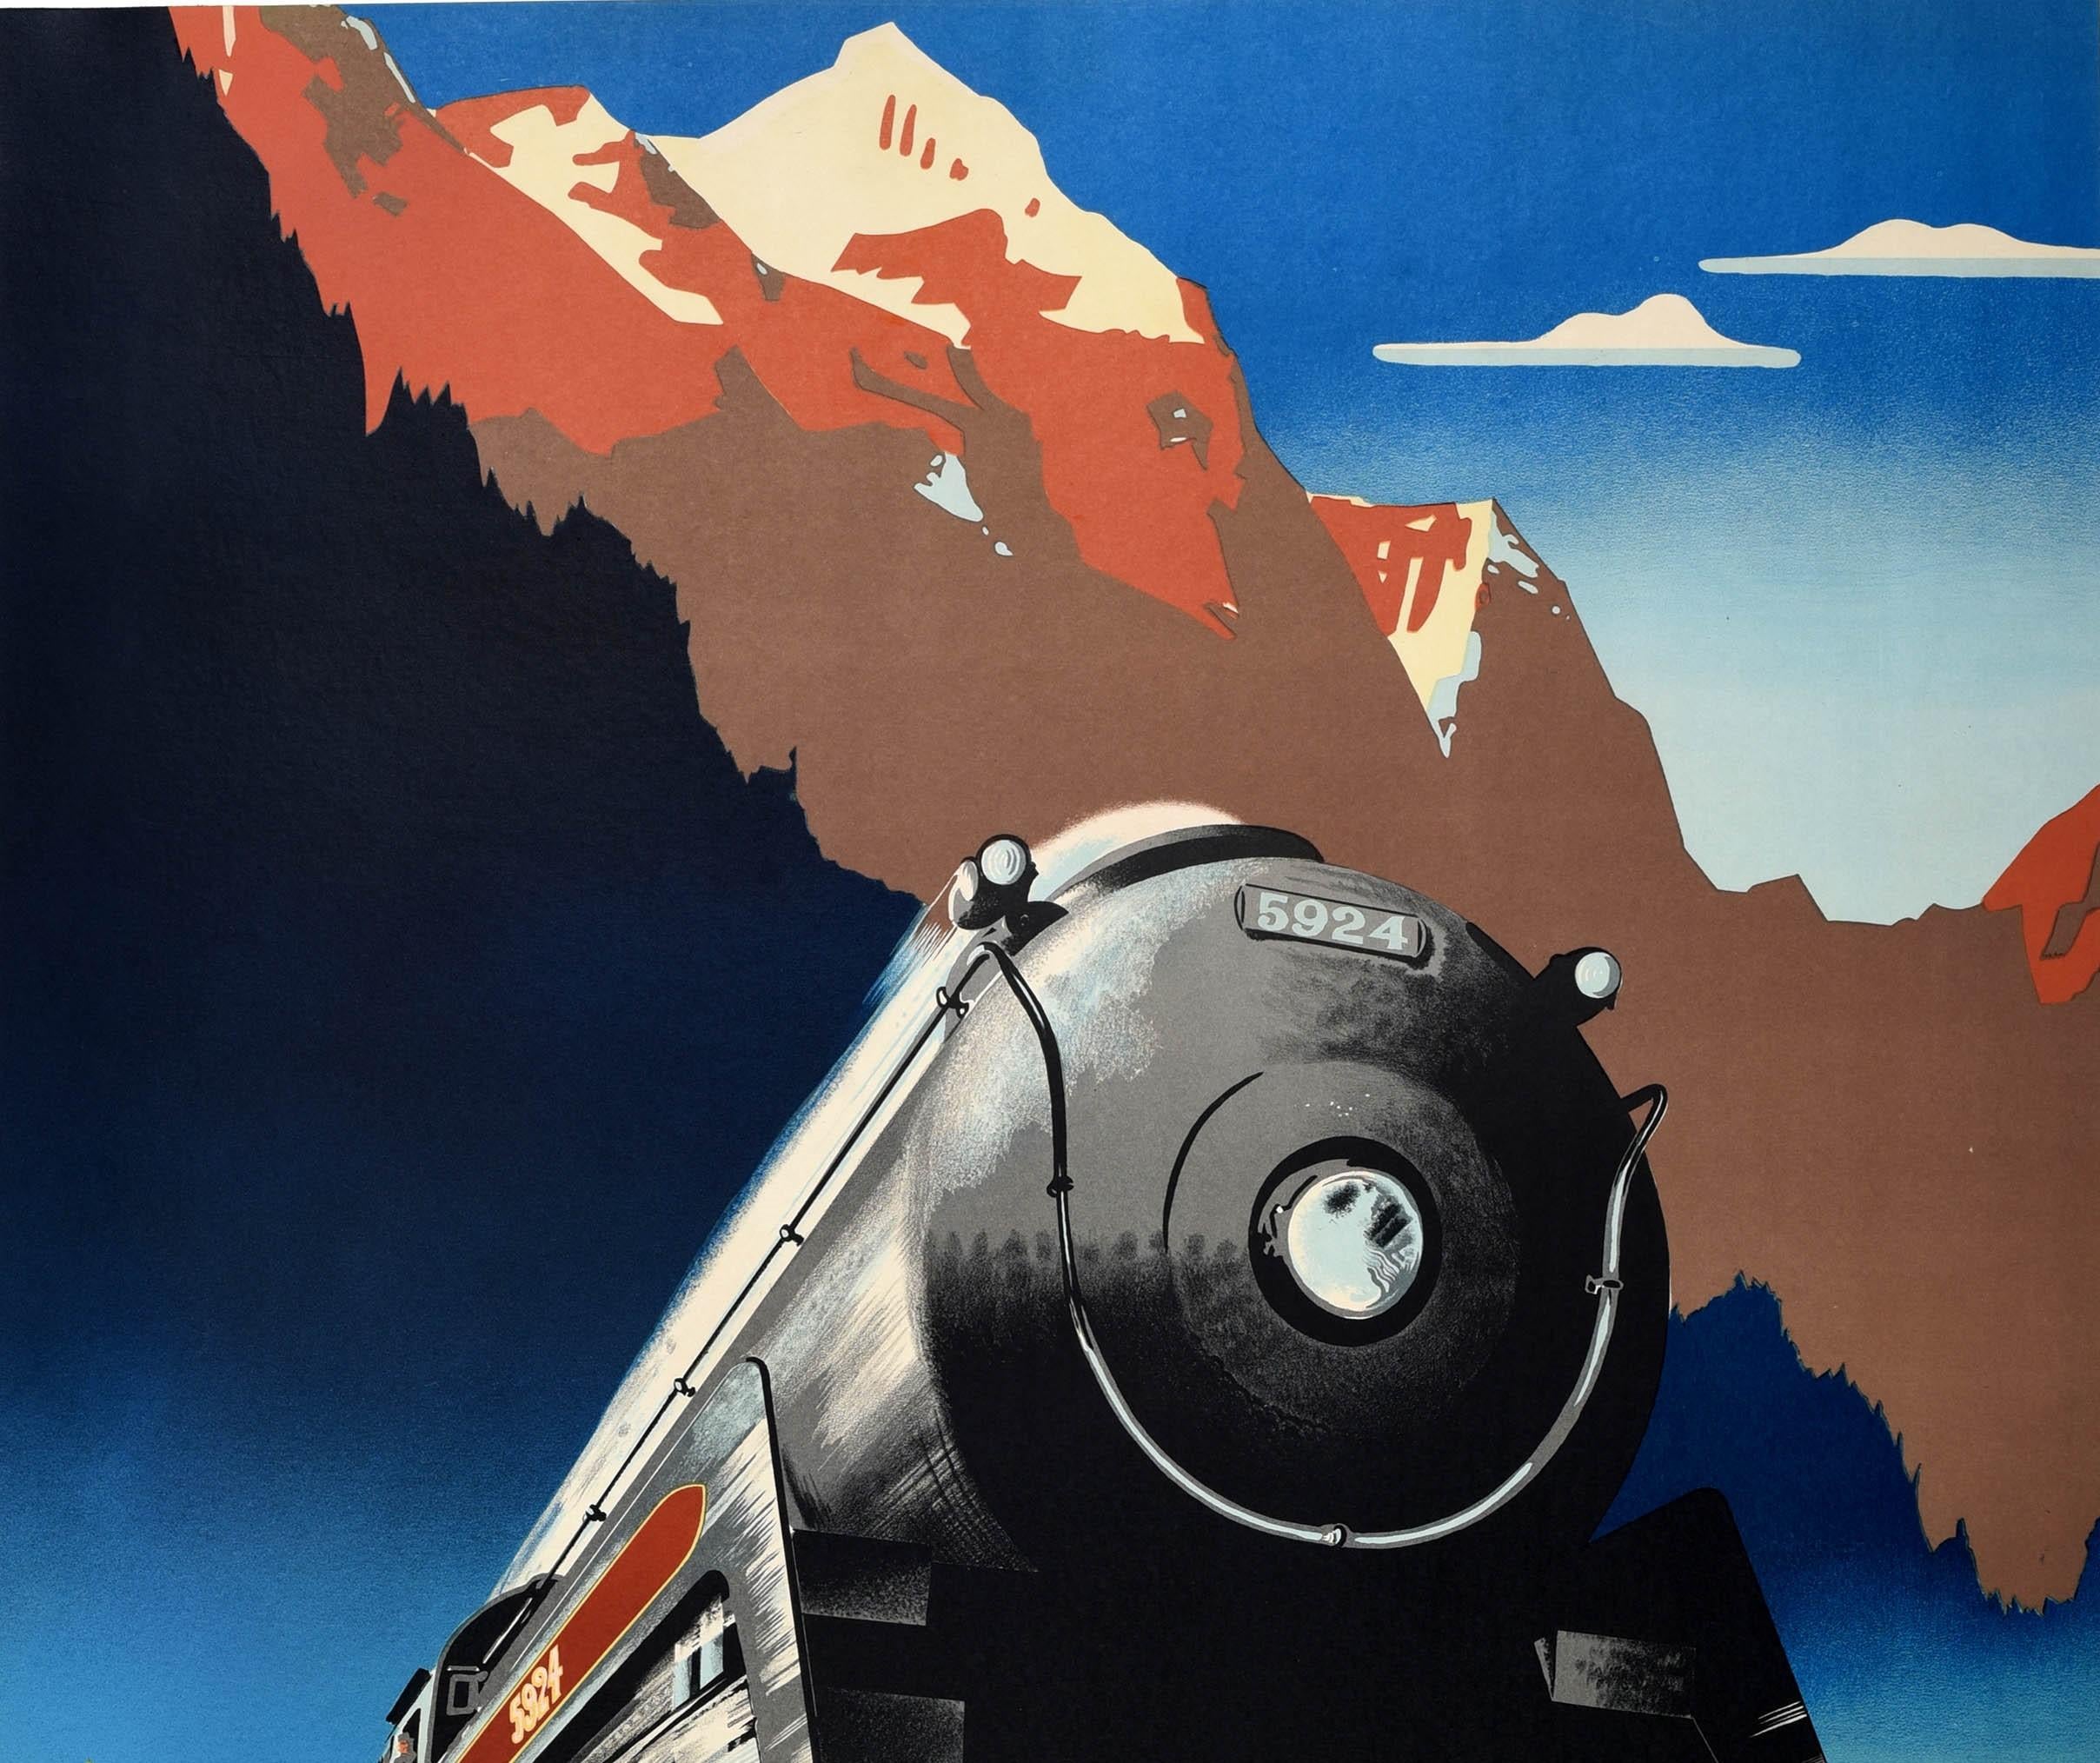 Original vintage travel advertising poster - Travel Canadian Pacific Across Canada! Stunning artwork by Peter Ewart (1918-2001) depicting a steam train travelling at speed through a tunnel along the railway tracks towards the viewer with a